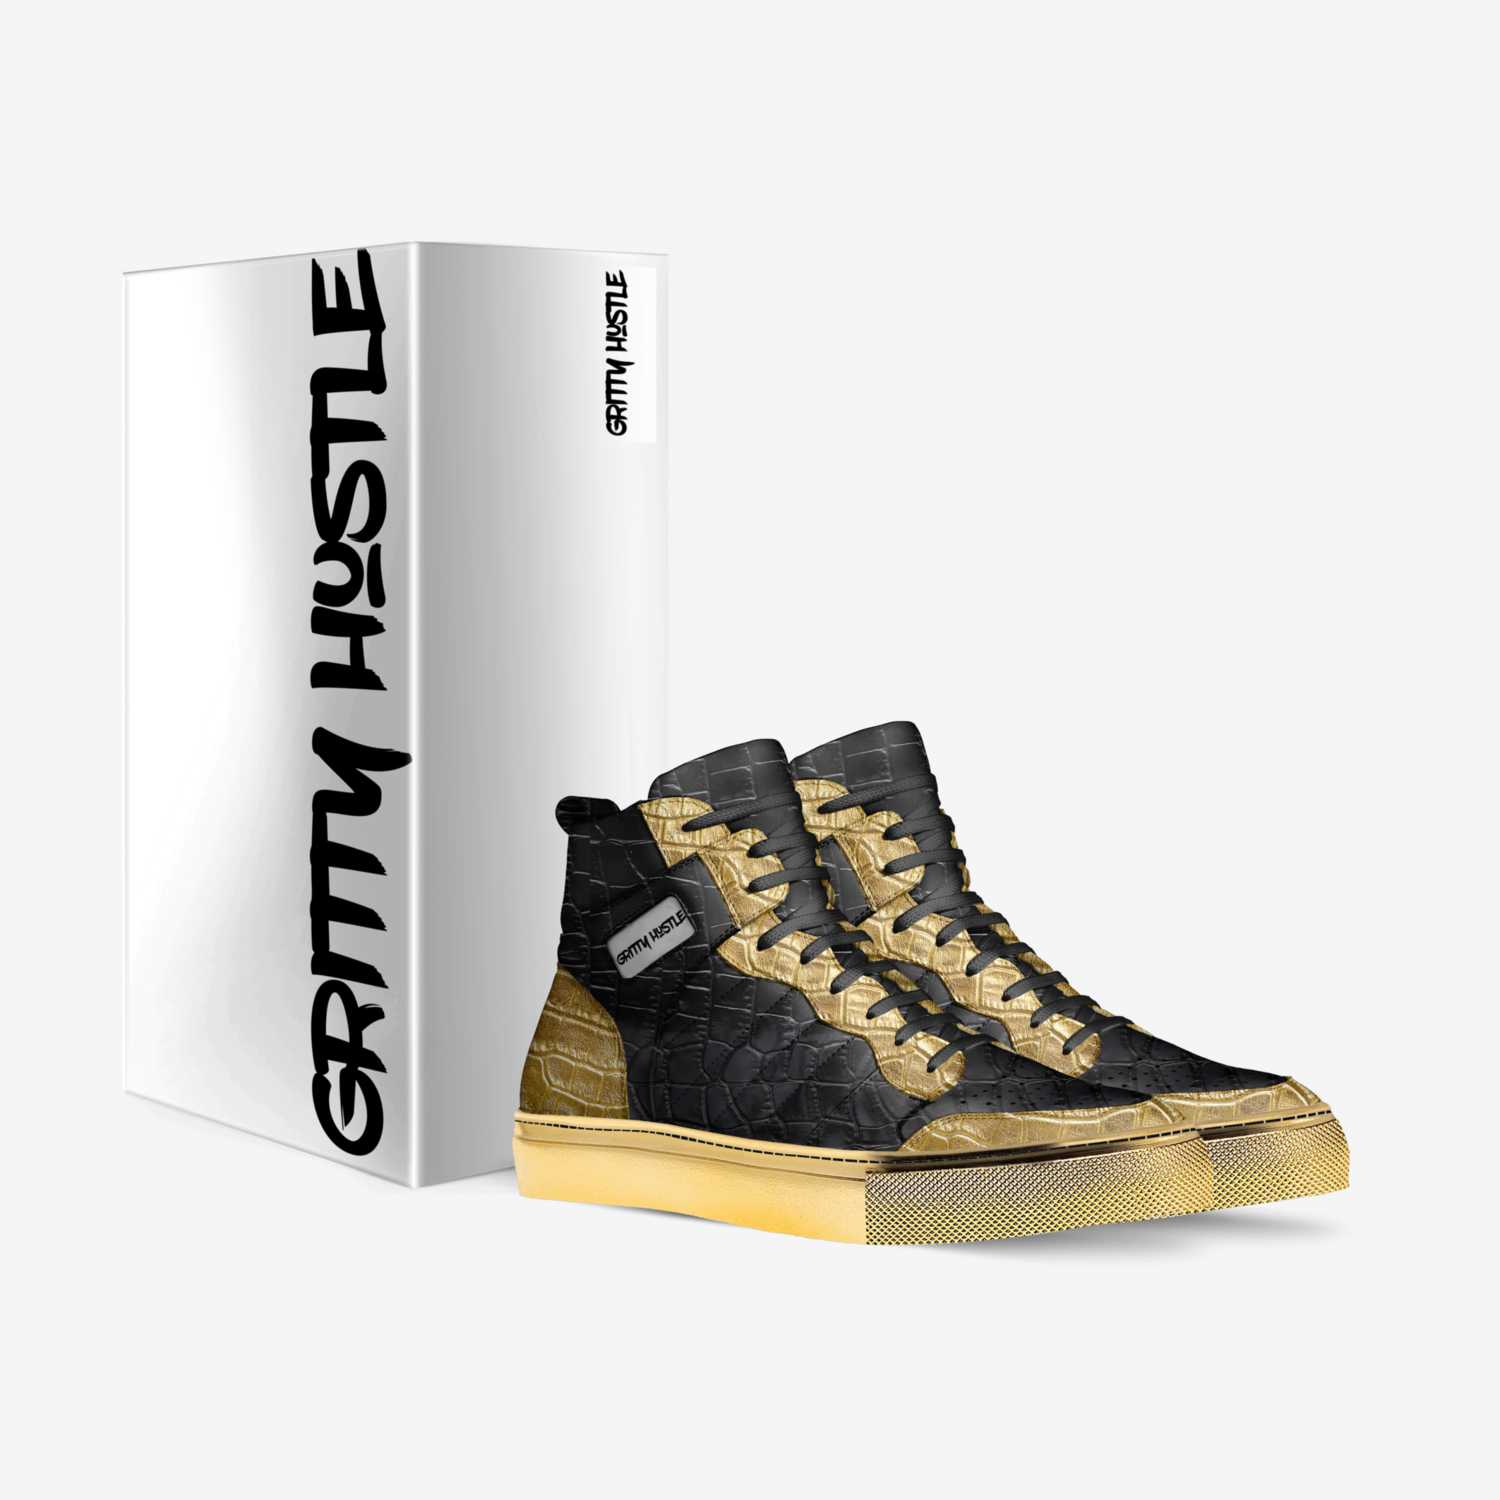 Gritty Hustle  custom made in Italy shoes by Kerry Rockwell | Box view